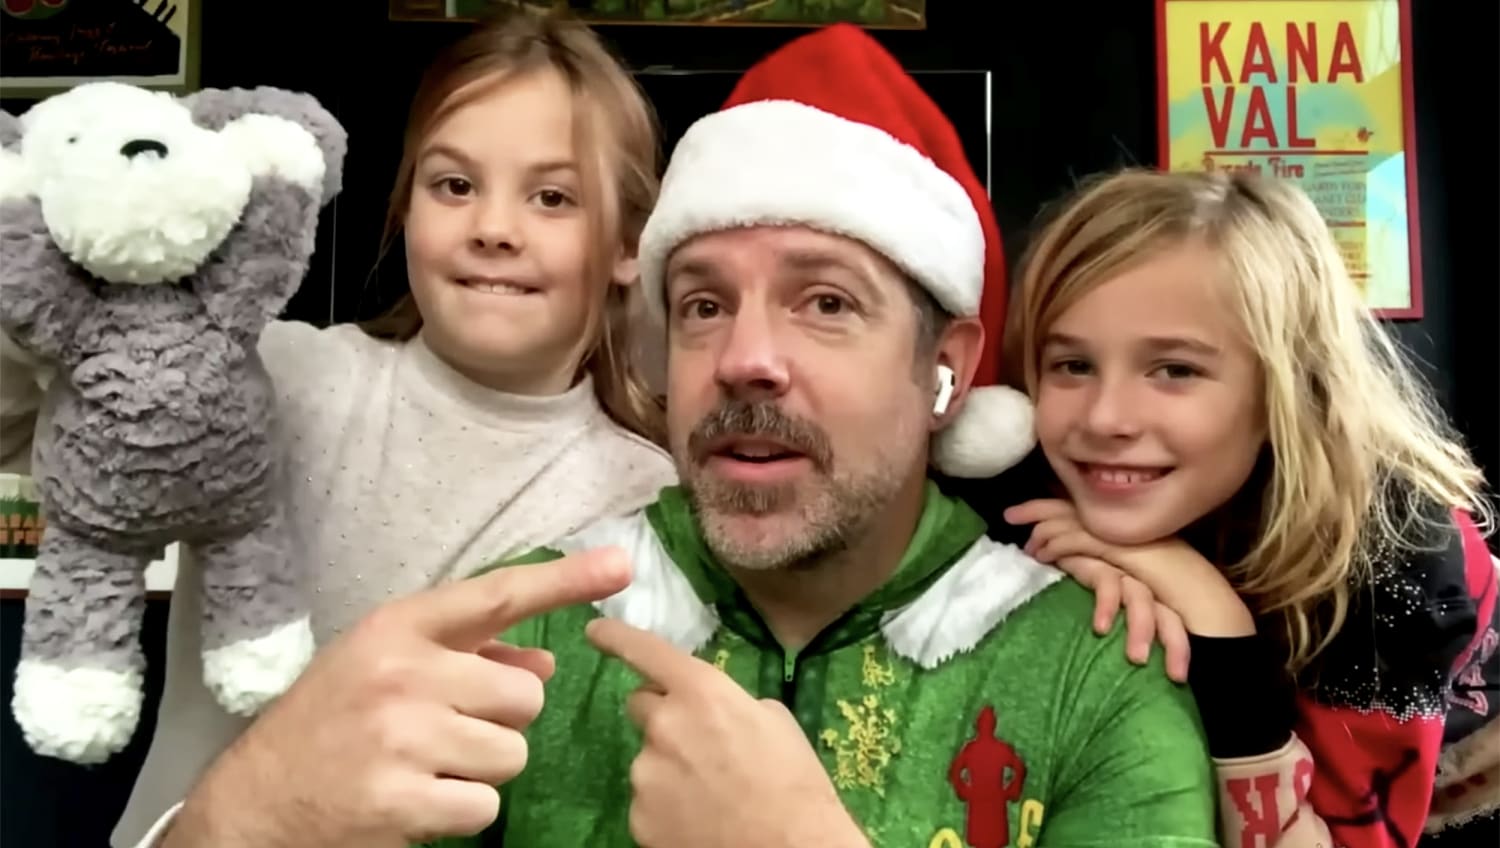 Jason Sudeikis' kids make a rare appearance when they crash his interview